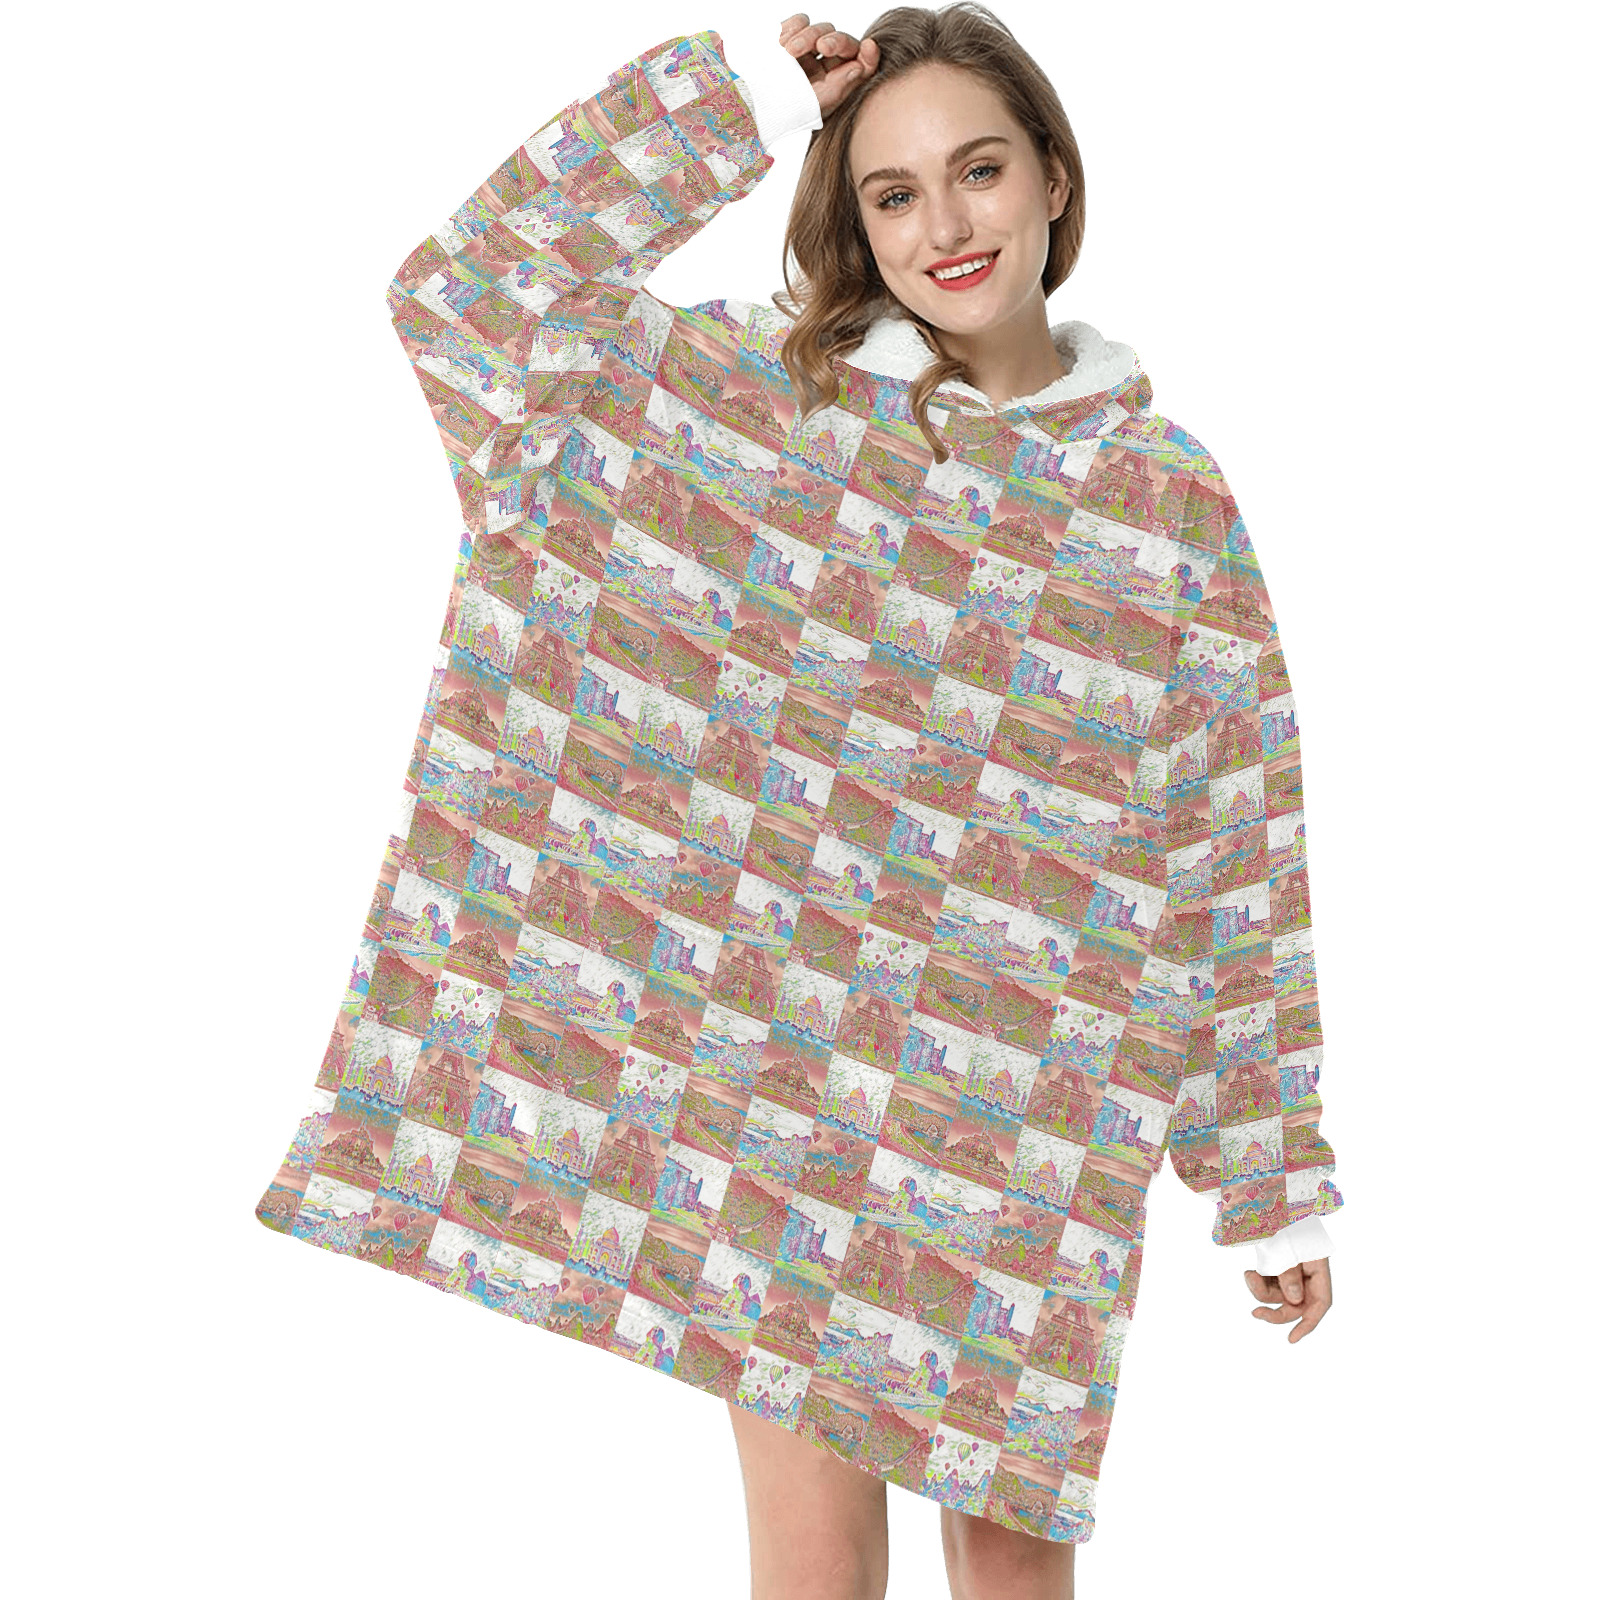 Big Pink and White World travel Collage Pattern Blanket Hoodie for Women